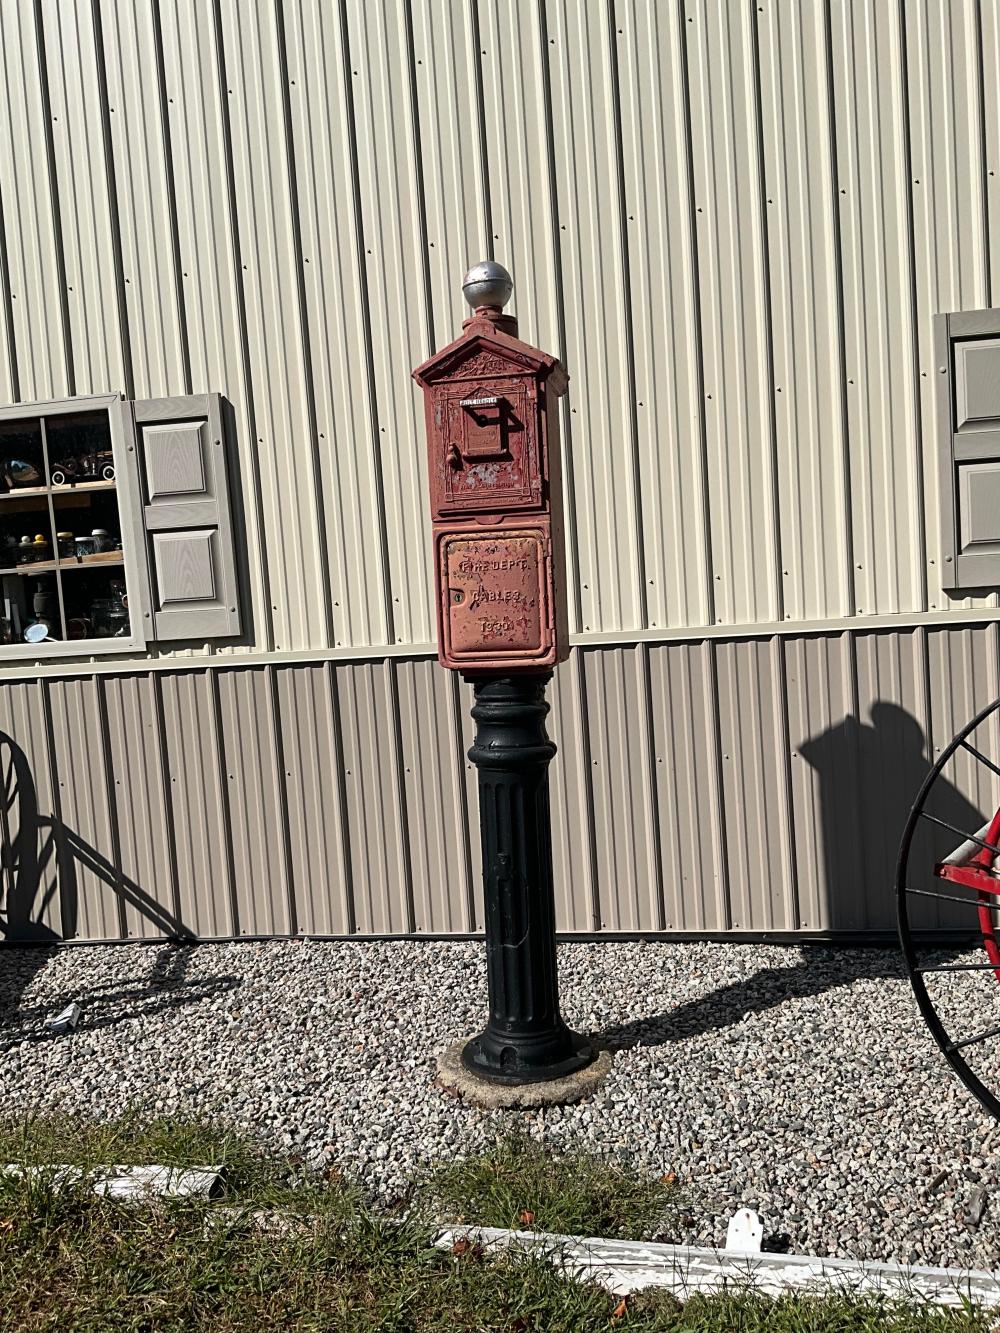 GAMEWELL FIRE CALL BOX 20TH CENTURY 3af823